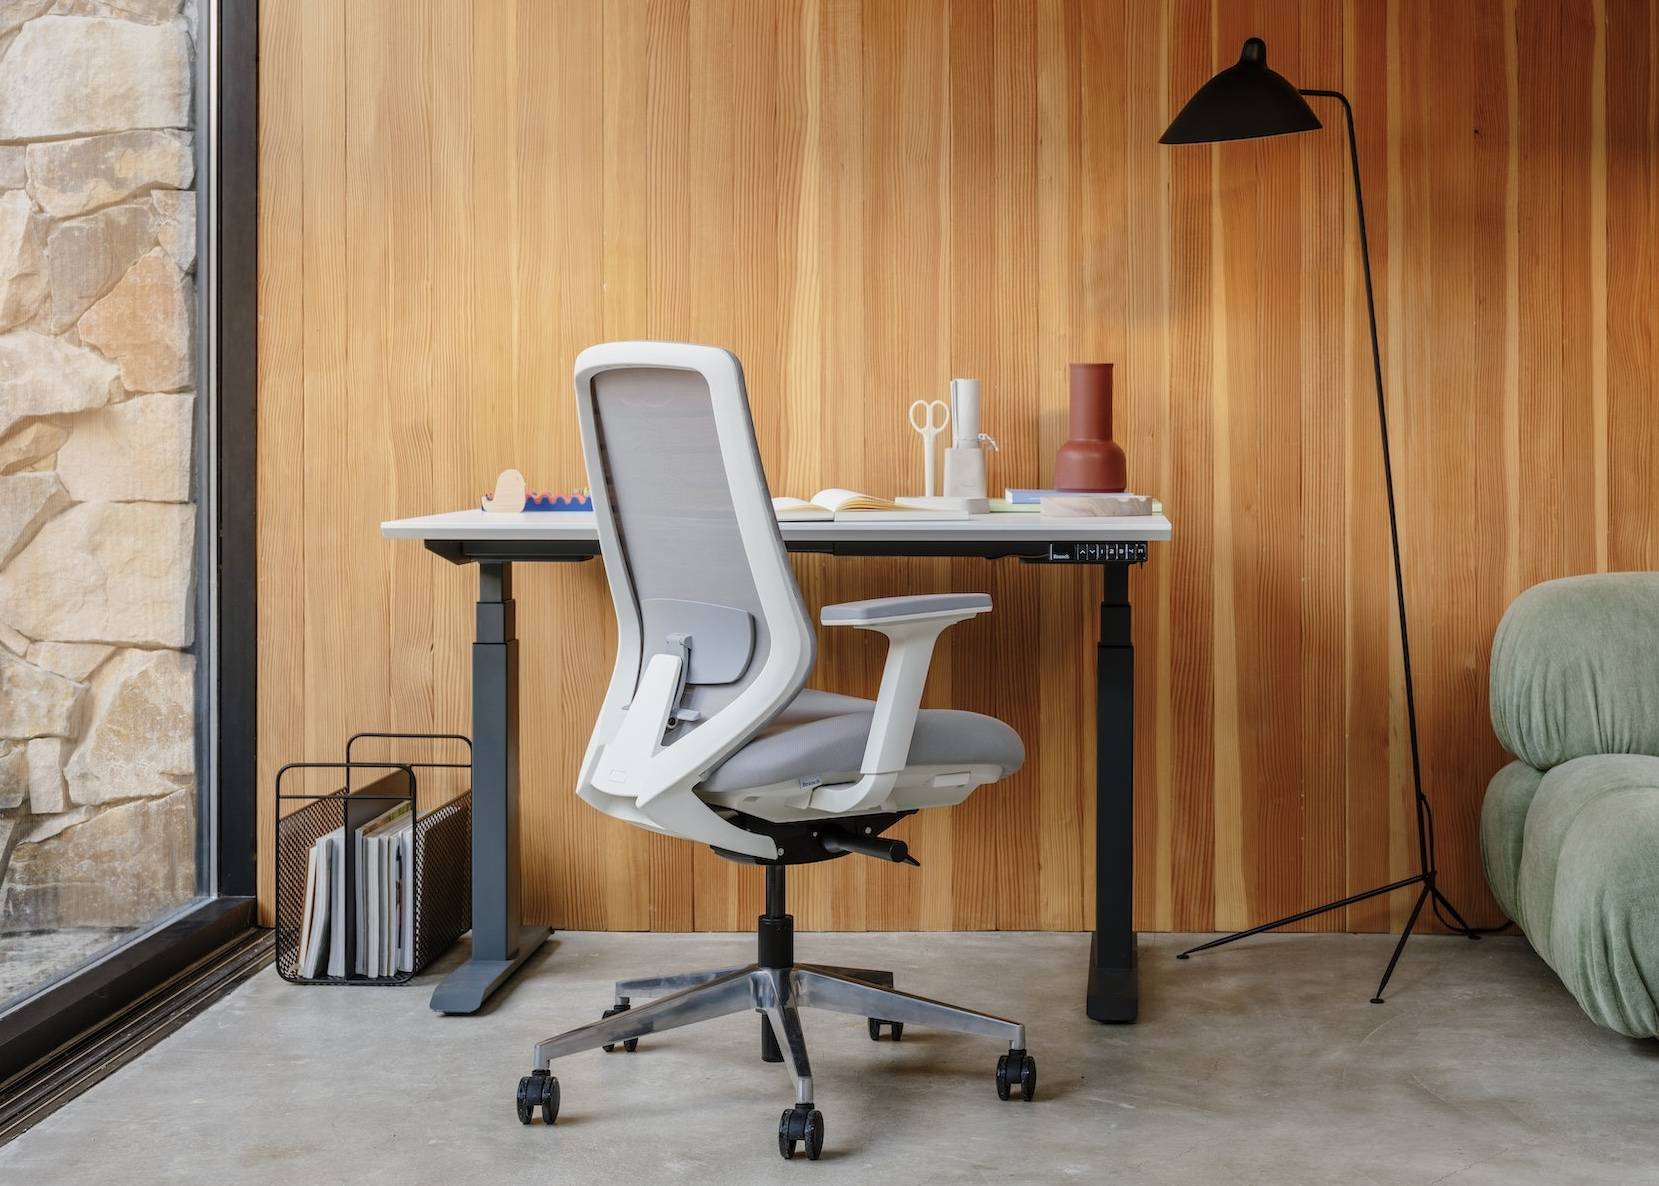 Sunaofe Voyager Task Chair: Relieve Back Pain